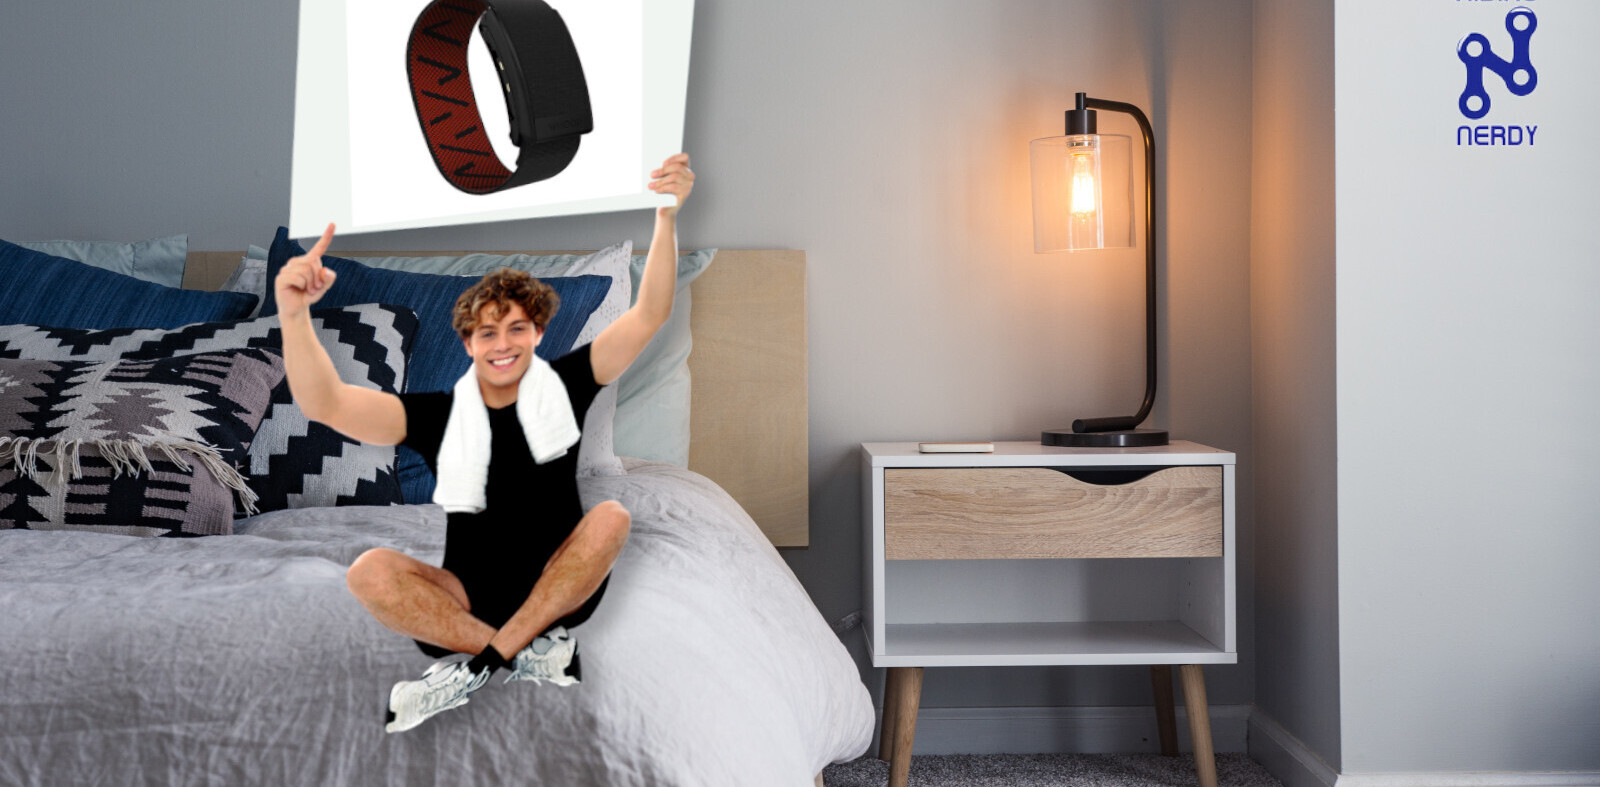 The Whoop fitness band transformed me from sleepy boy to fit boy in two months